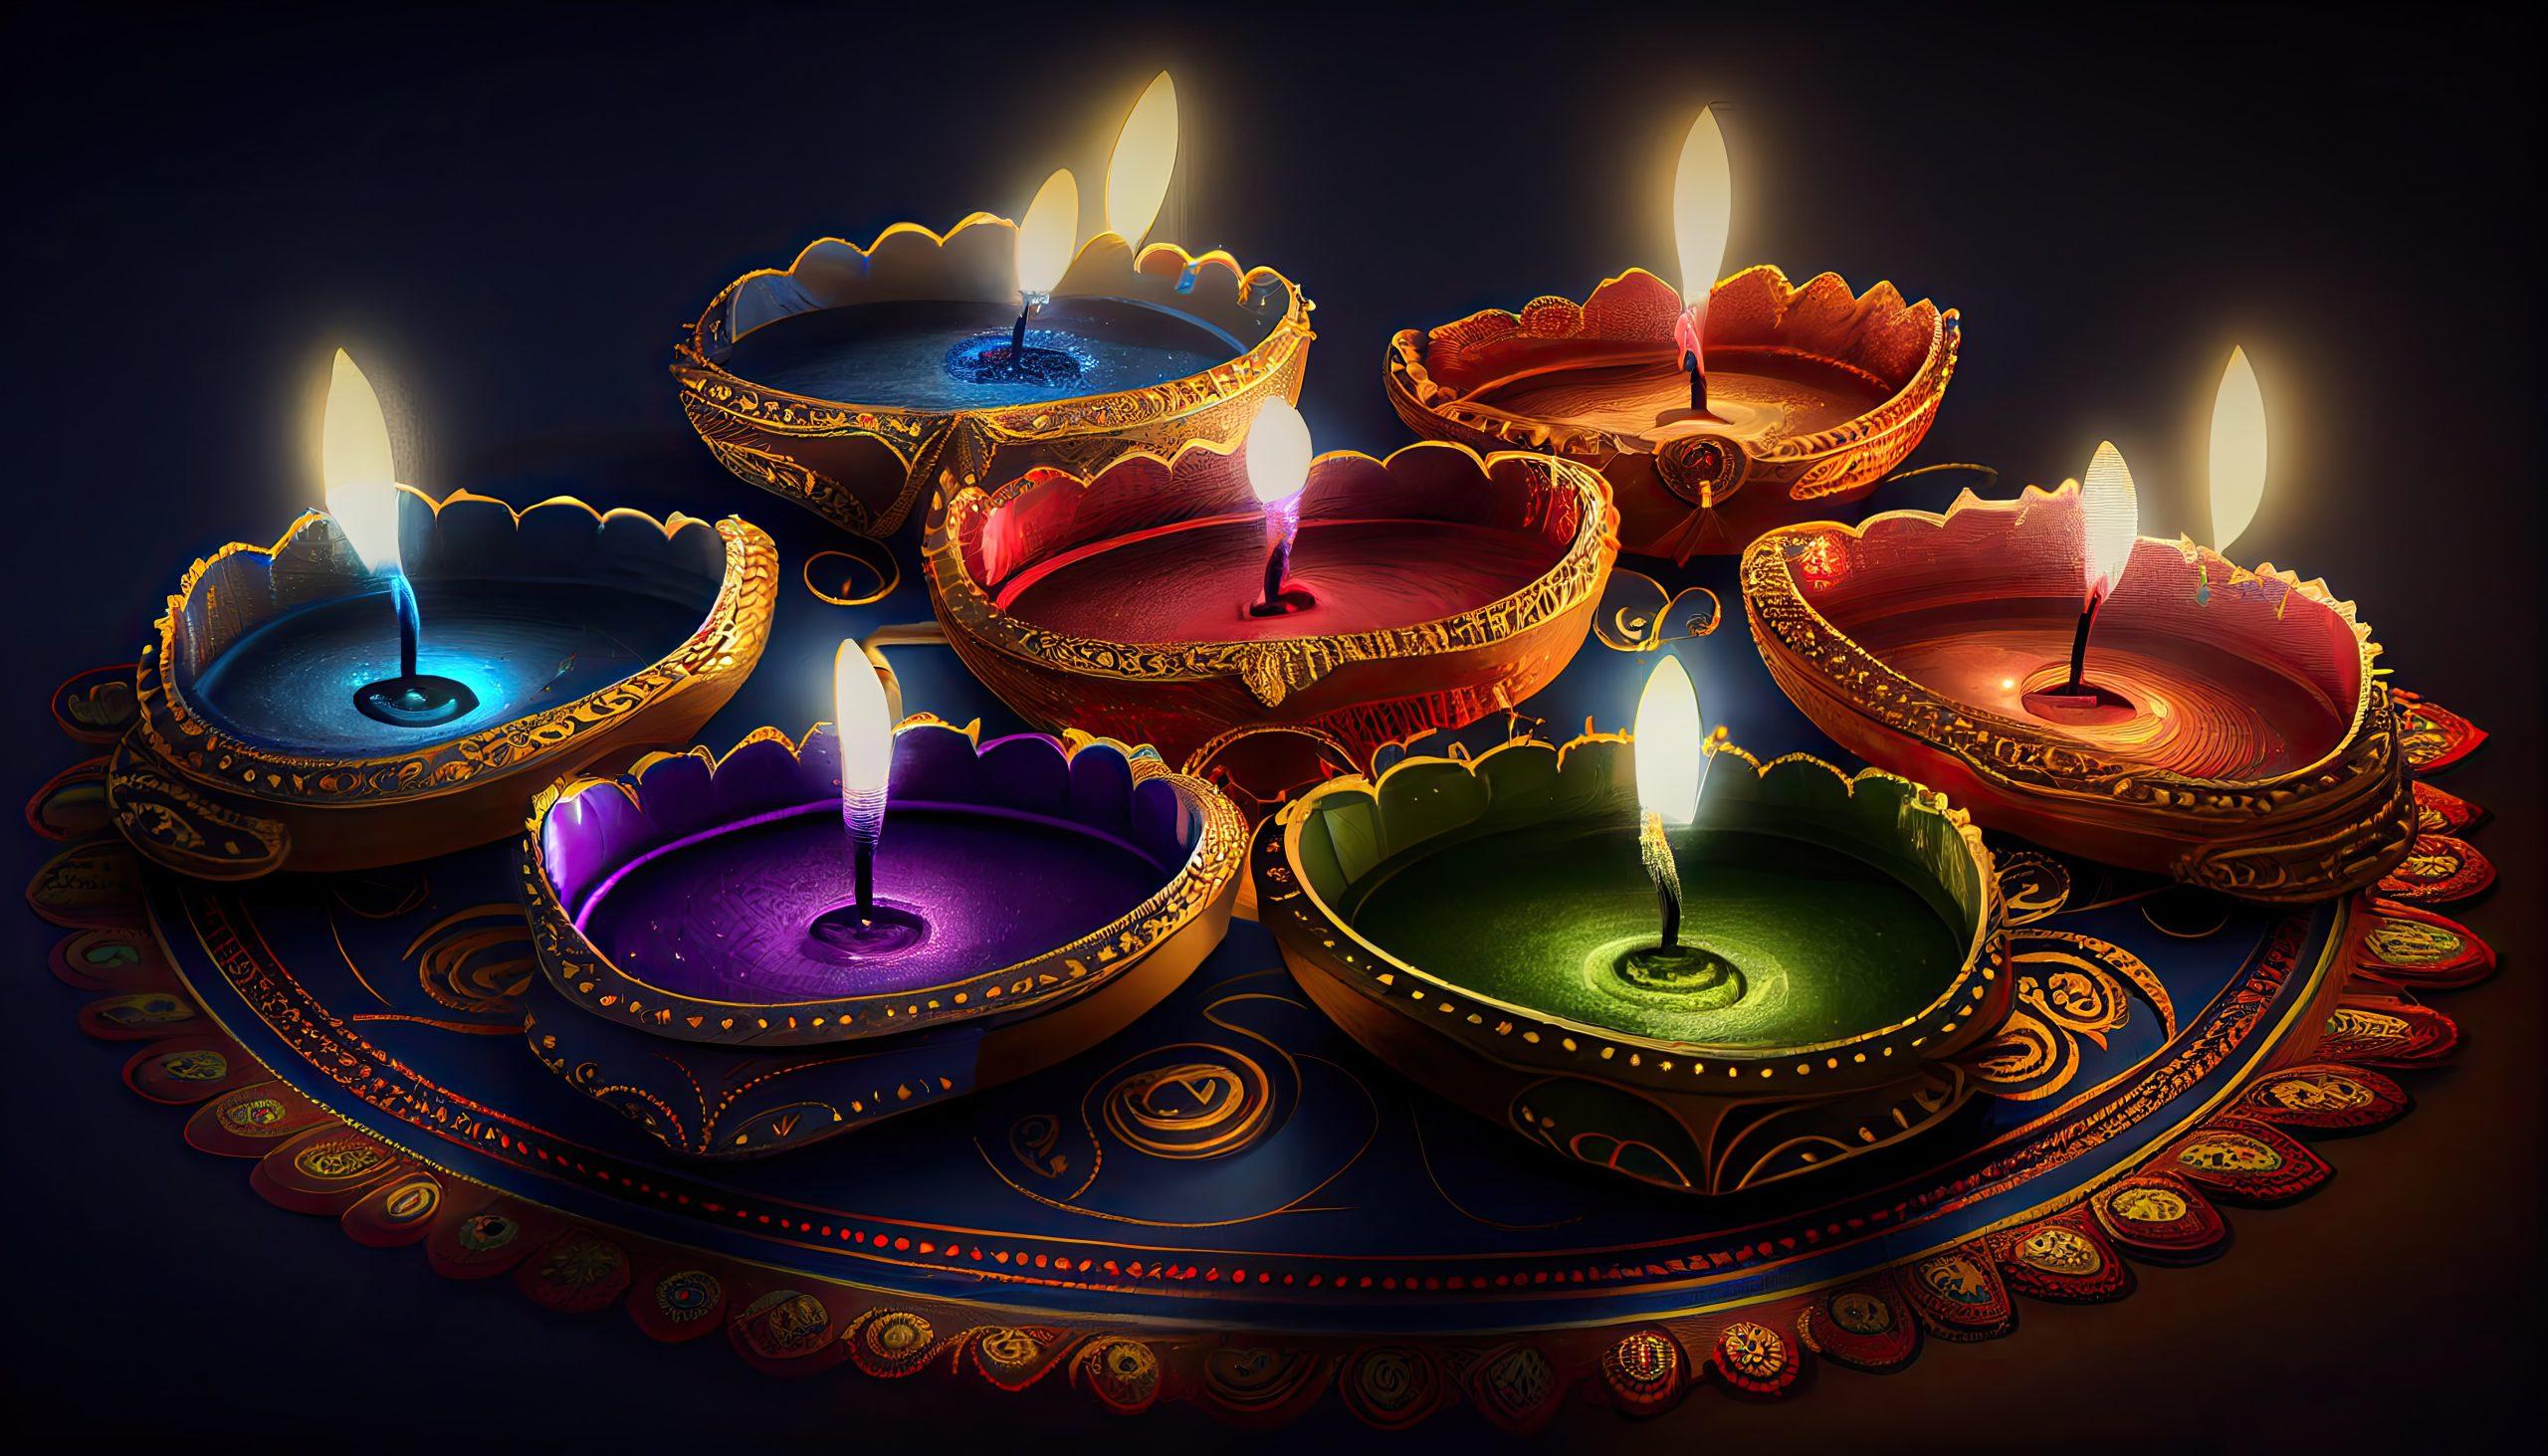 Bringing the Light of Diwali to Your Gifting: Diwali Photo Gifting Ideas